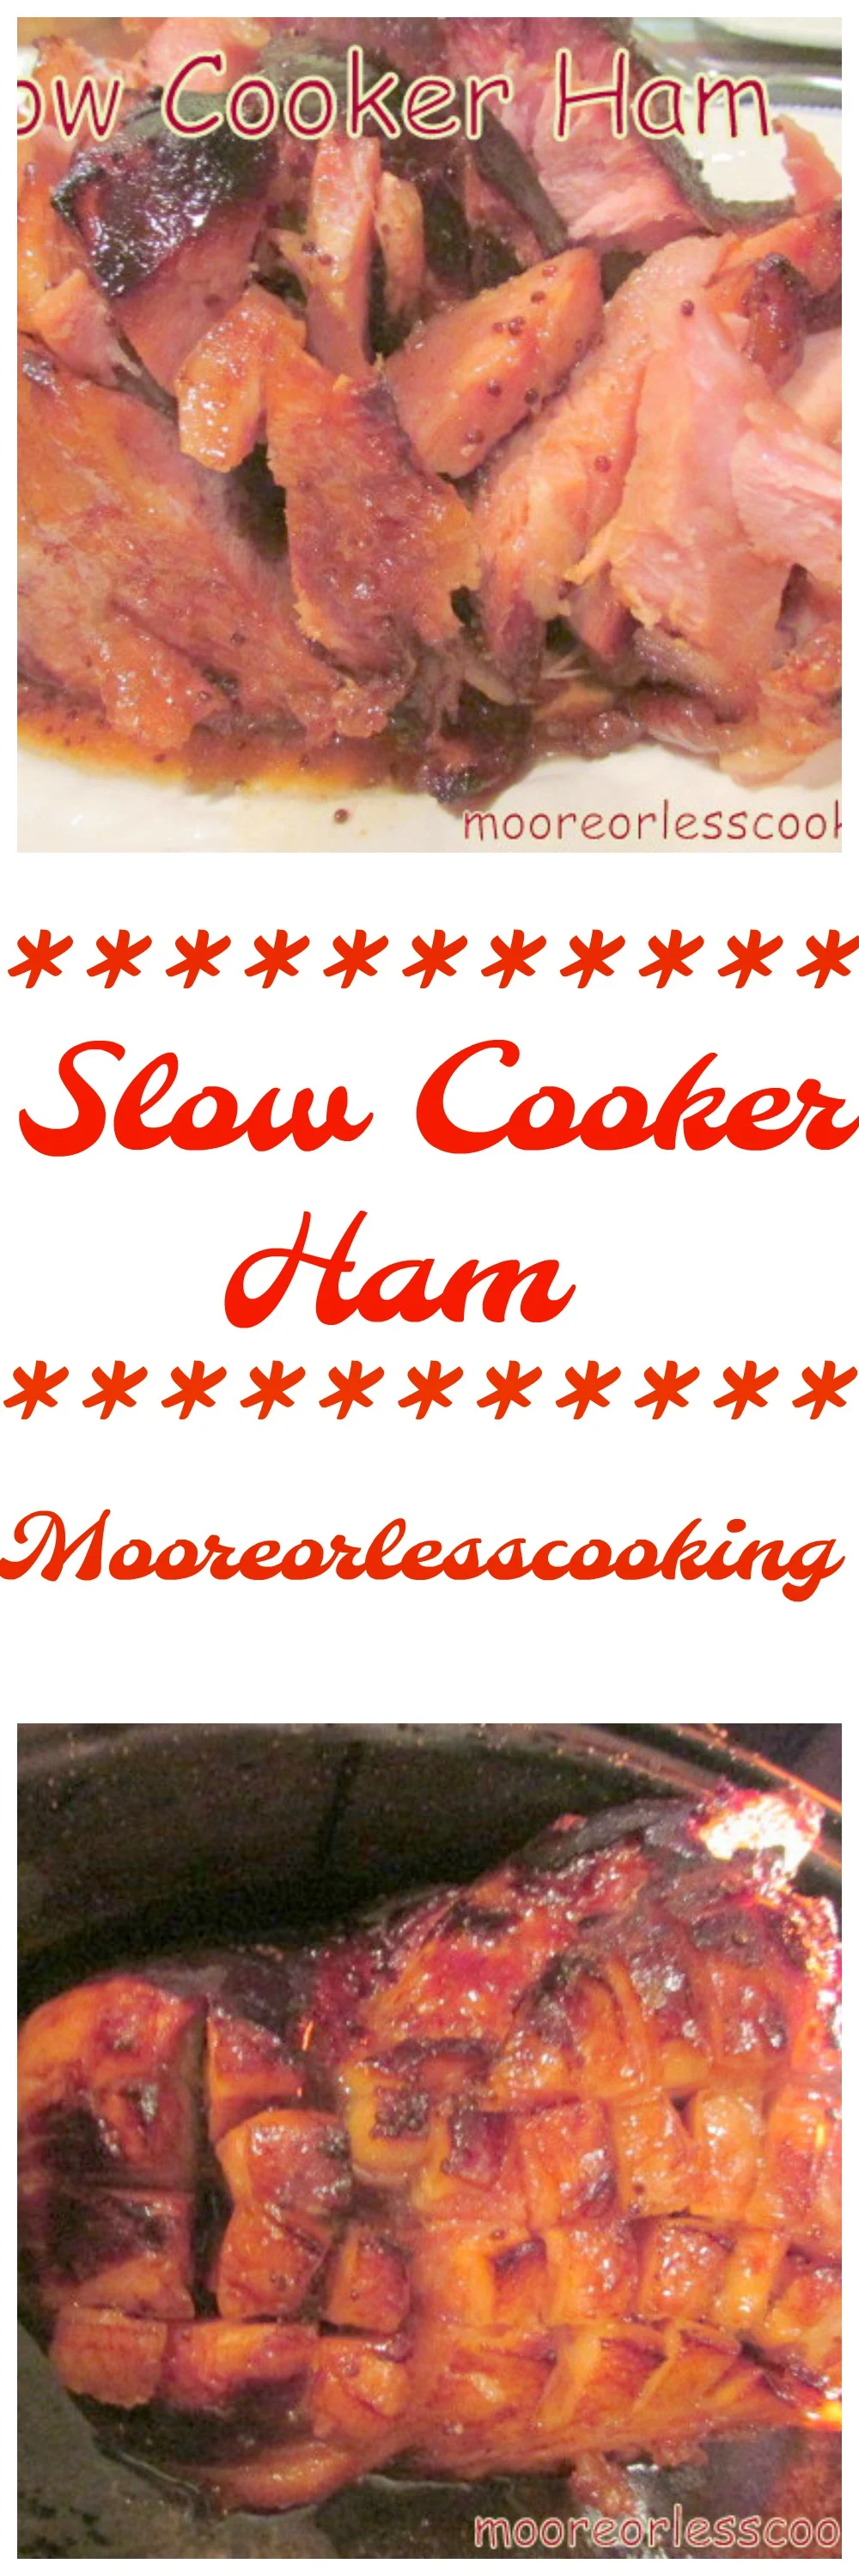 When your oven is being used baking cookies, this is a wonderful recipe for a tender moist ham. I made a 6.5-pound ham with this recipe. It was delicious! via @Mooreorlesscook